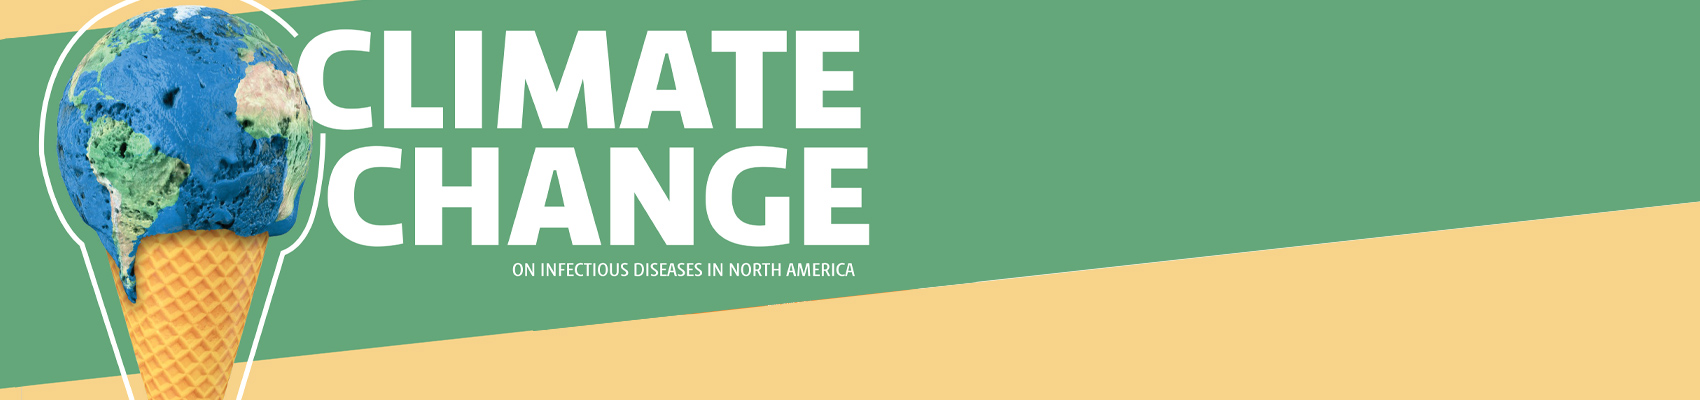 Probable effects of climate change on infectious diseases in North America